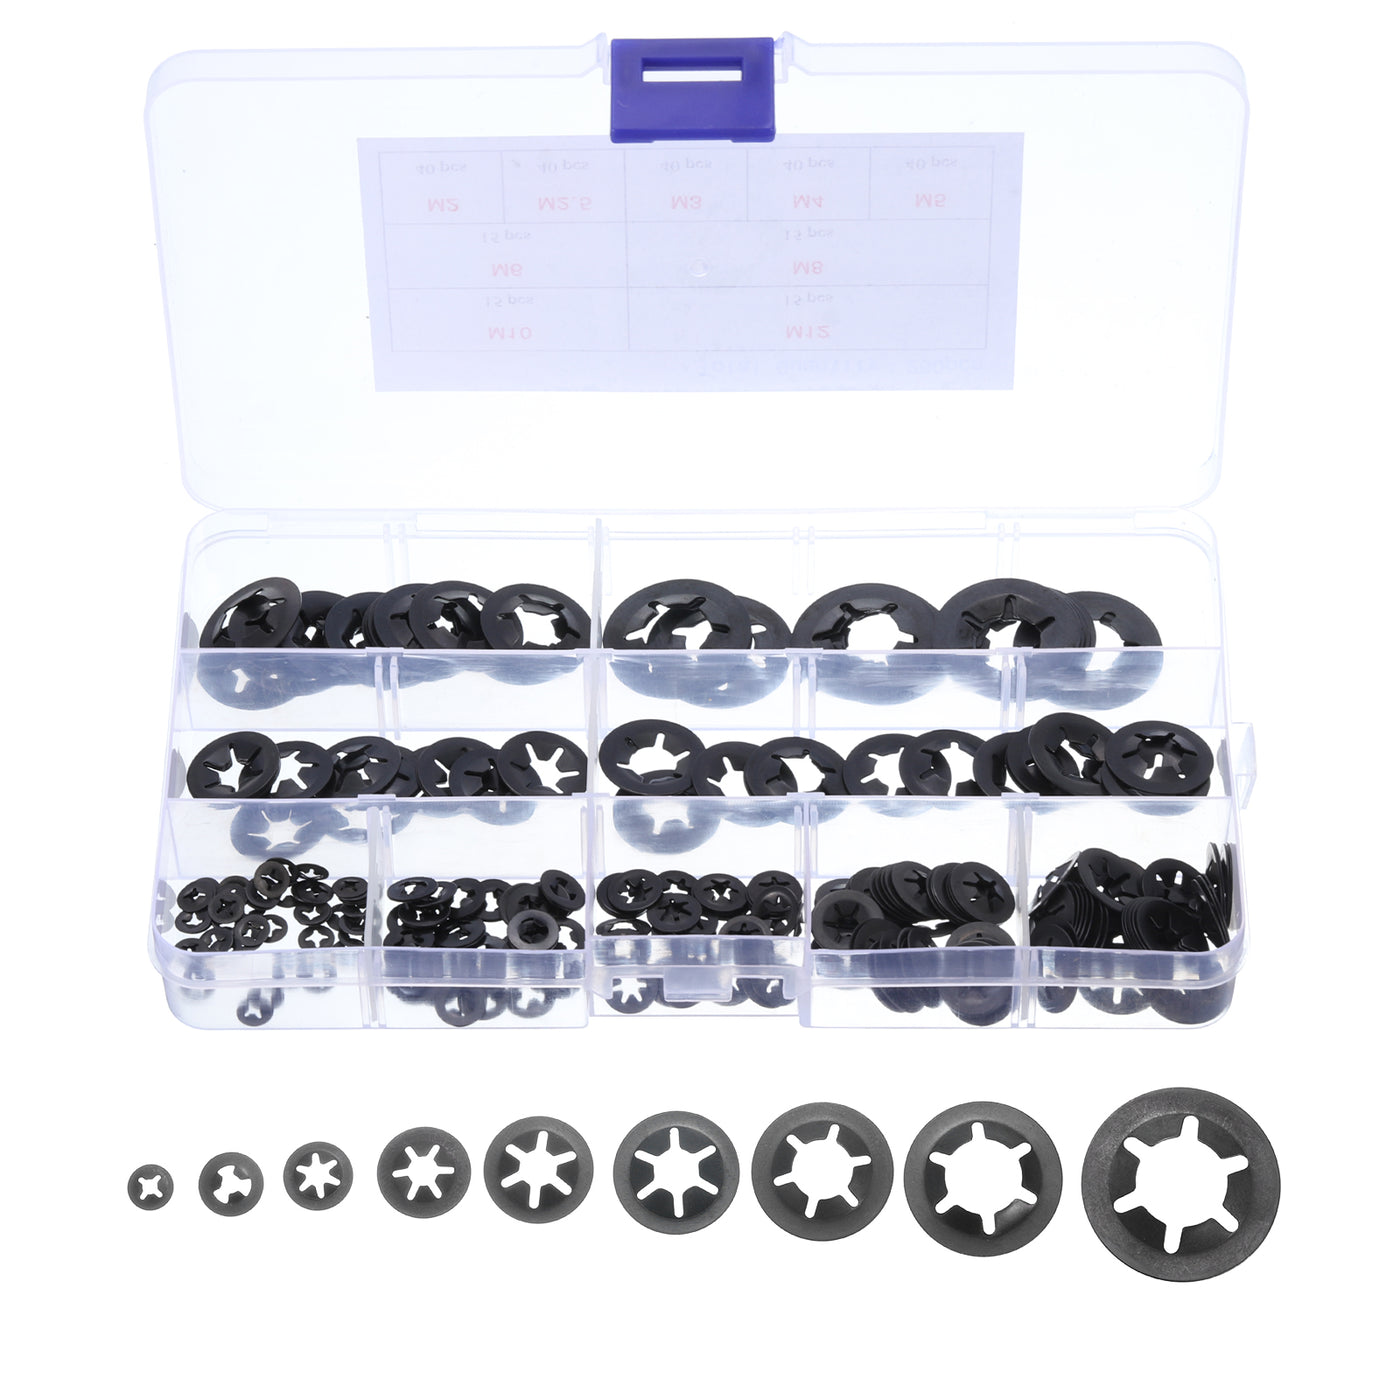 uxcell Uxcell 260pcs Internal Tooth Lock Washers M2 M2.5 M3 M4 M5 M6 M8 M10 M12, 65Mn Steel